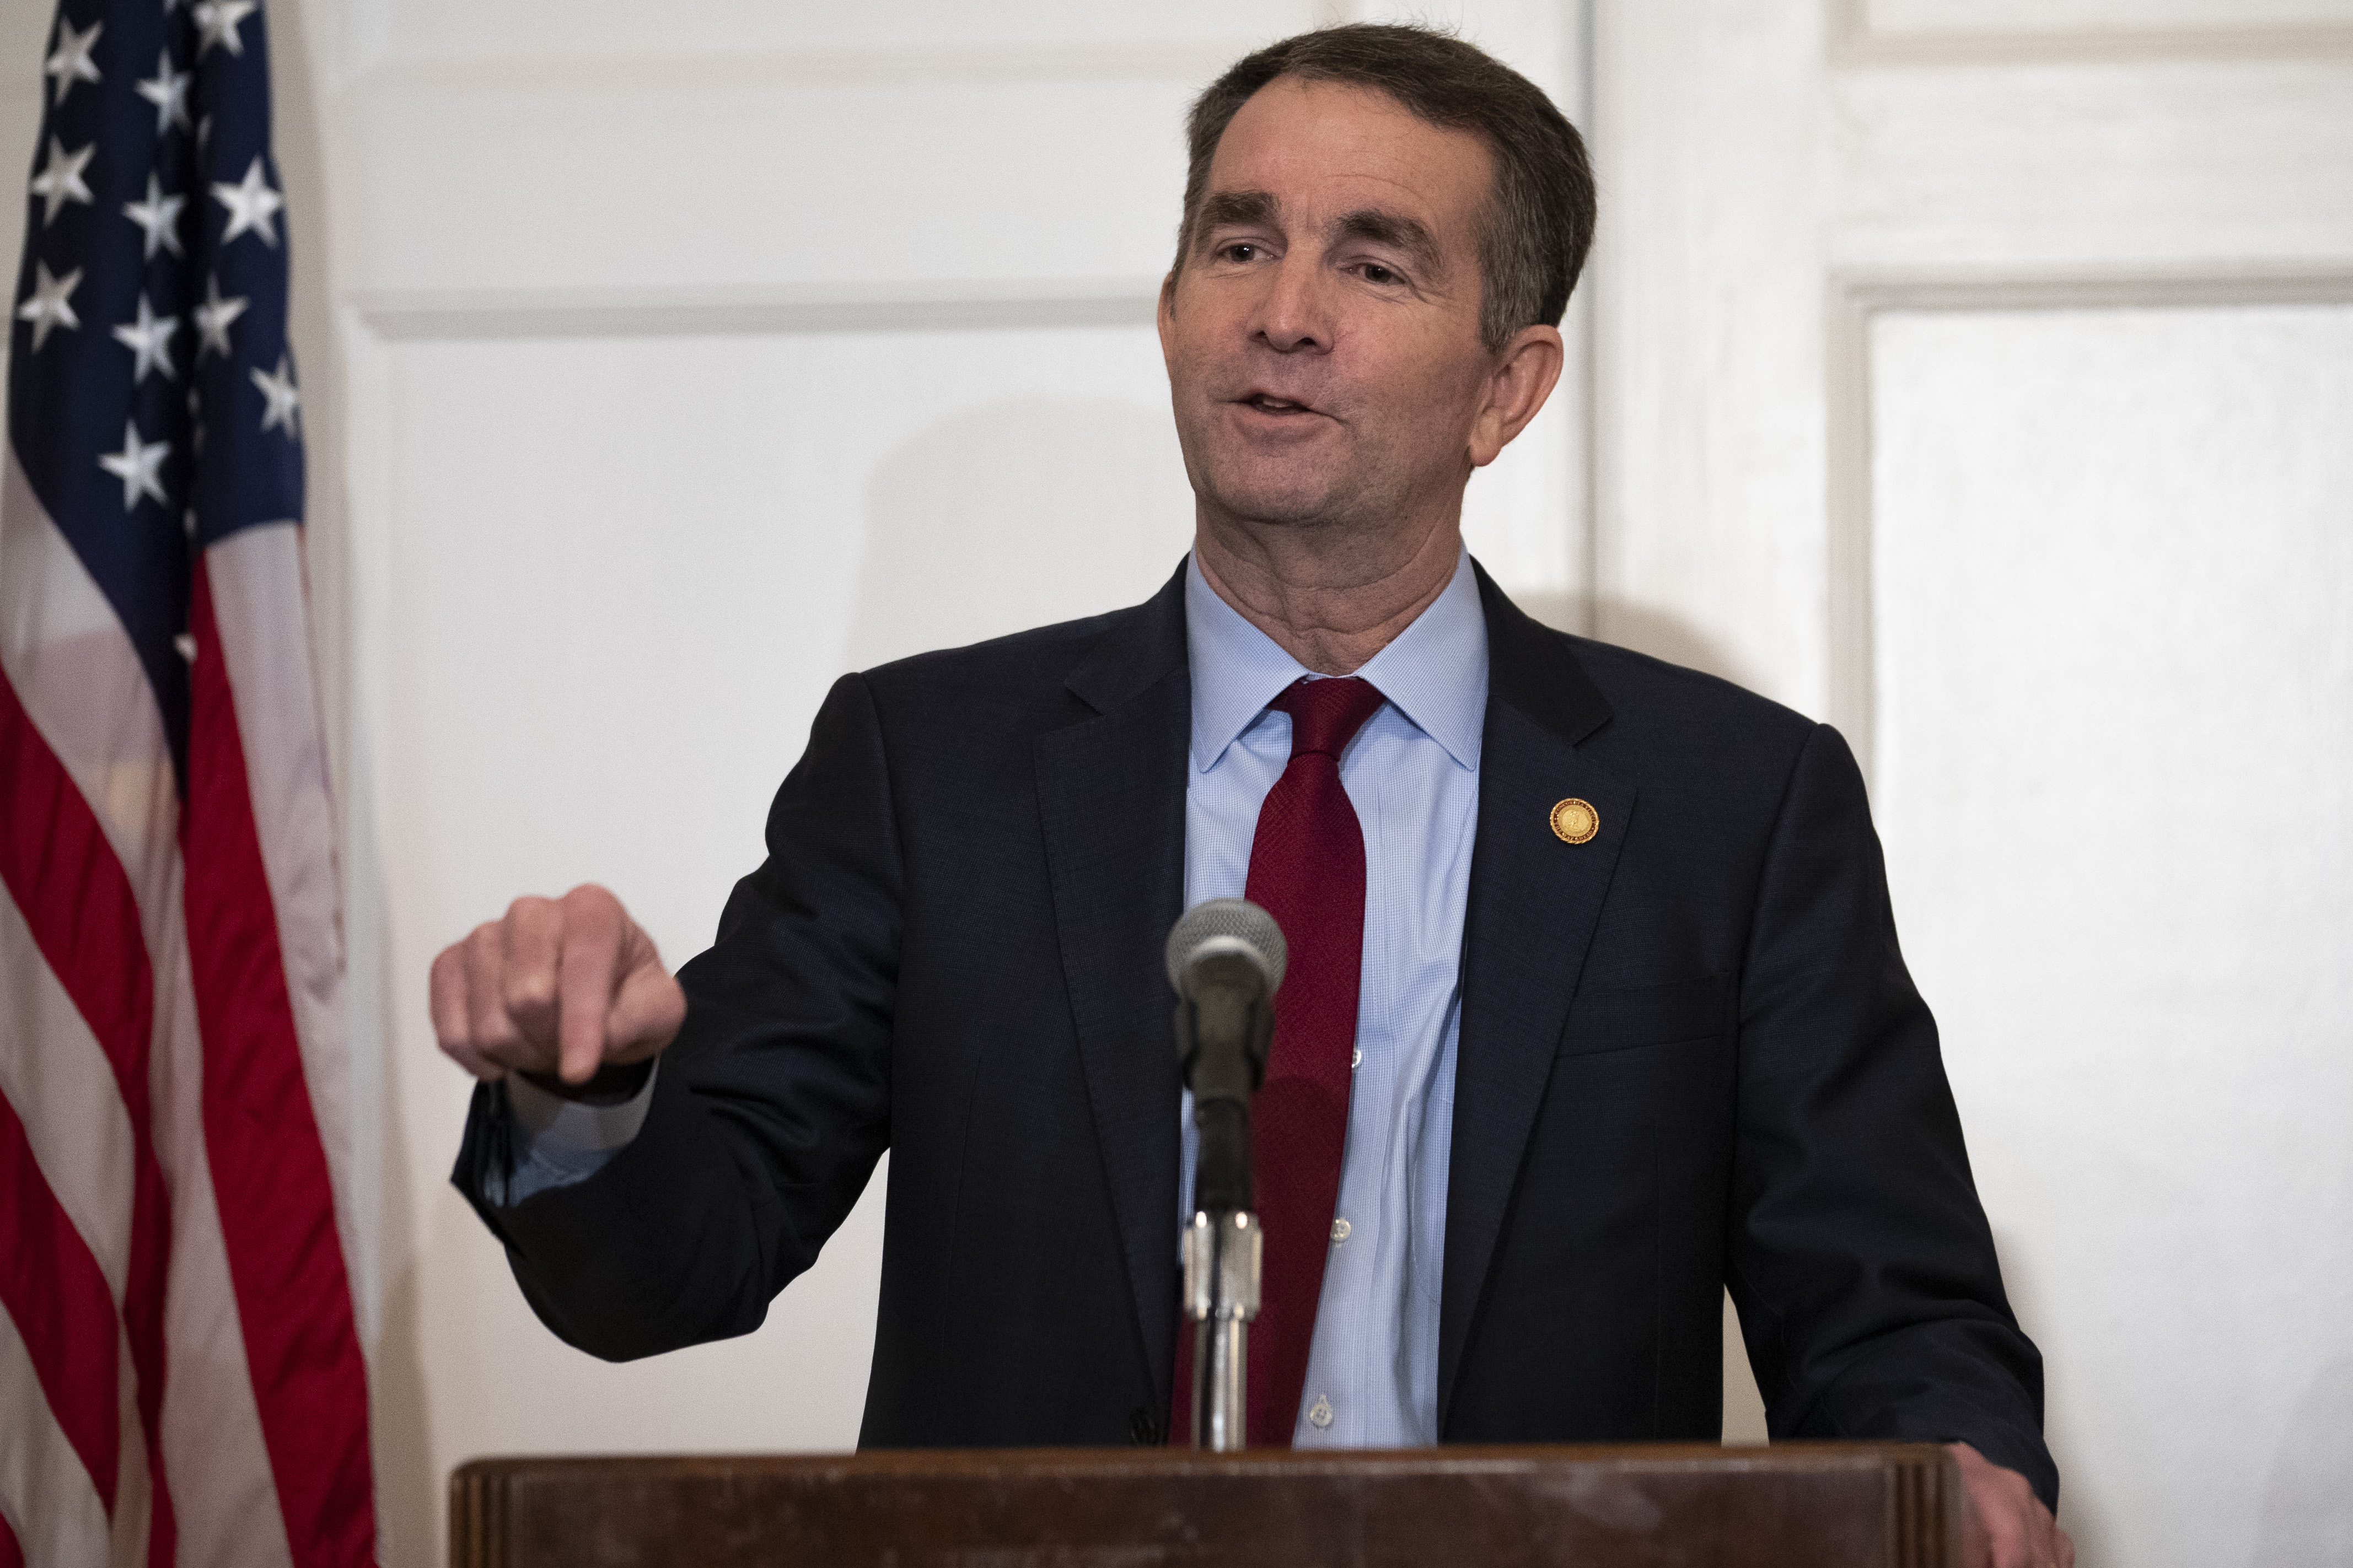 RICHMOND, VA - FEBRUARY 02: Virginia Governor Ralph Northam speaks with reporters at a press conference at the Governor's mansion on February 2, 2019 in Richmond, Virginia. (Alex Edelman/Getty Images)